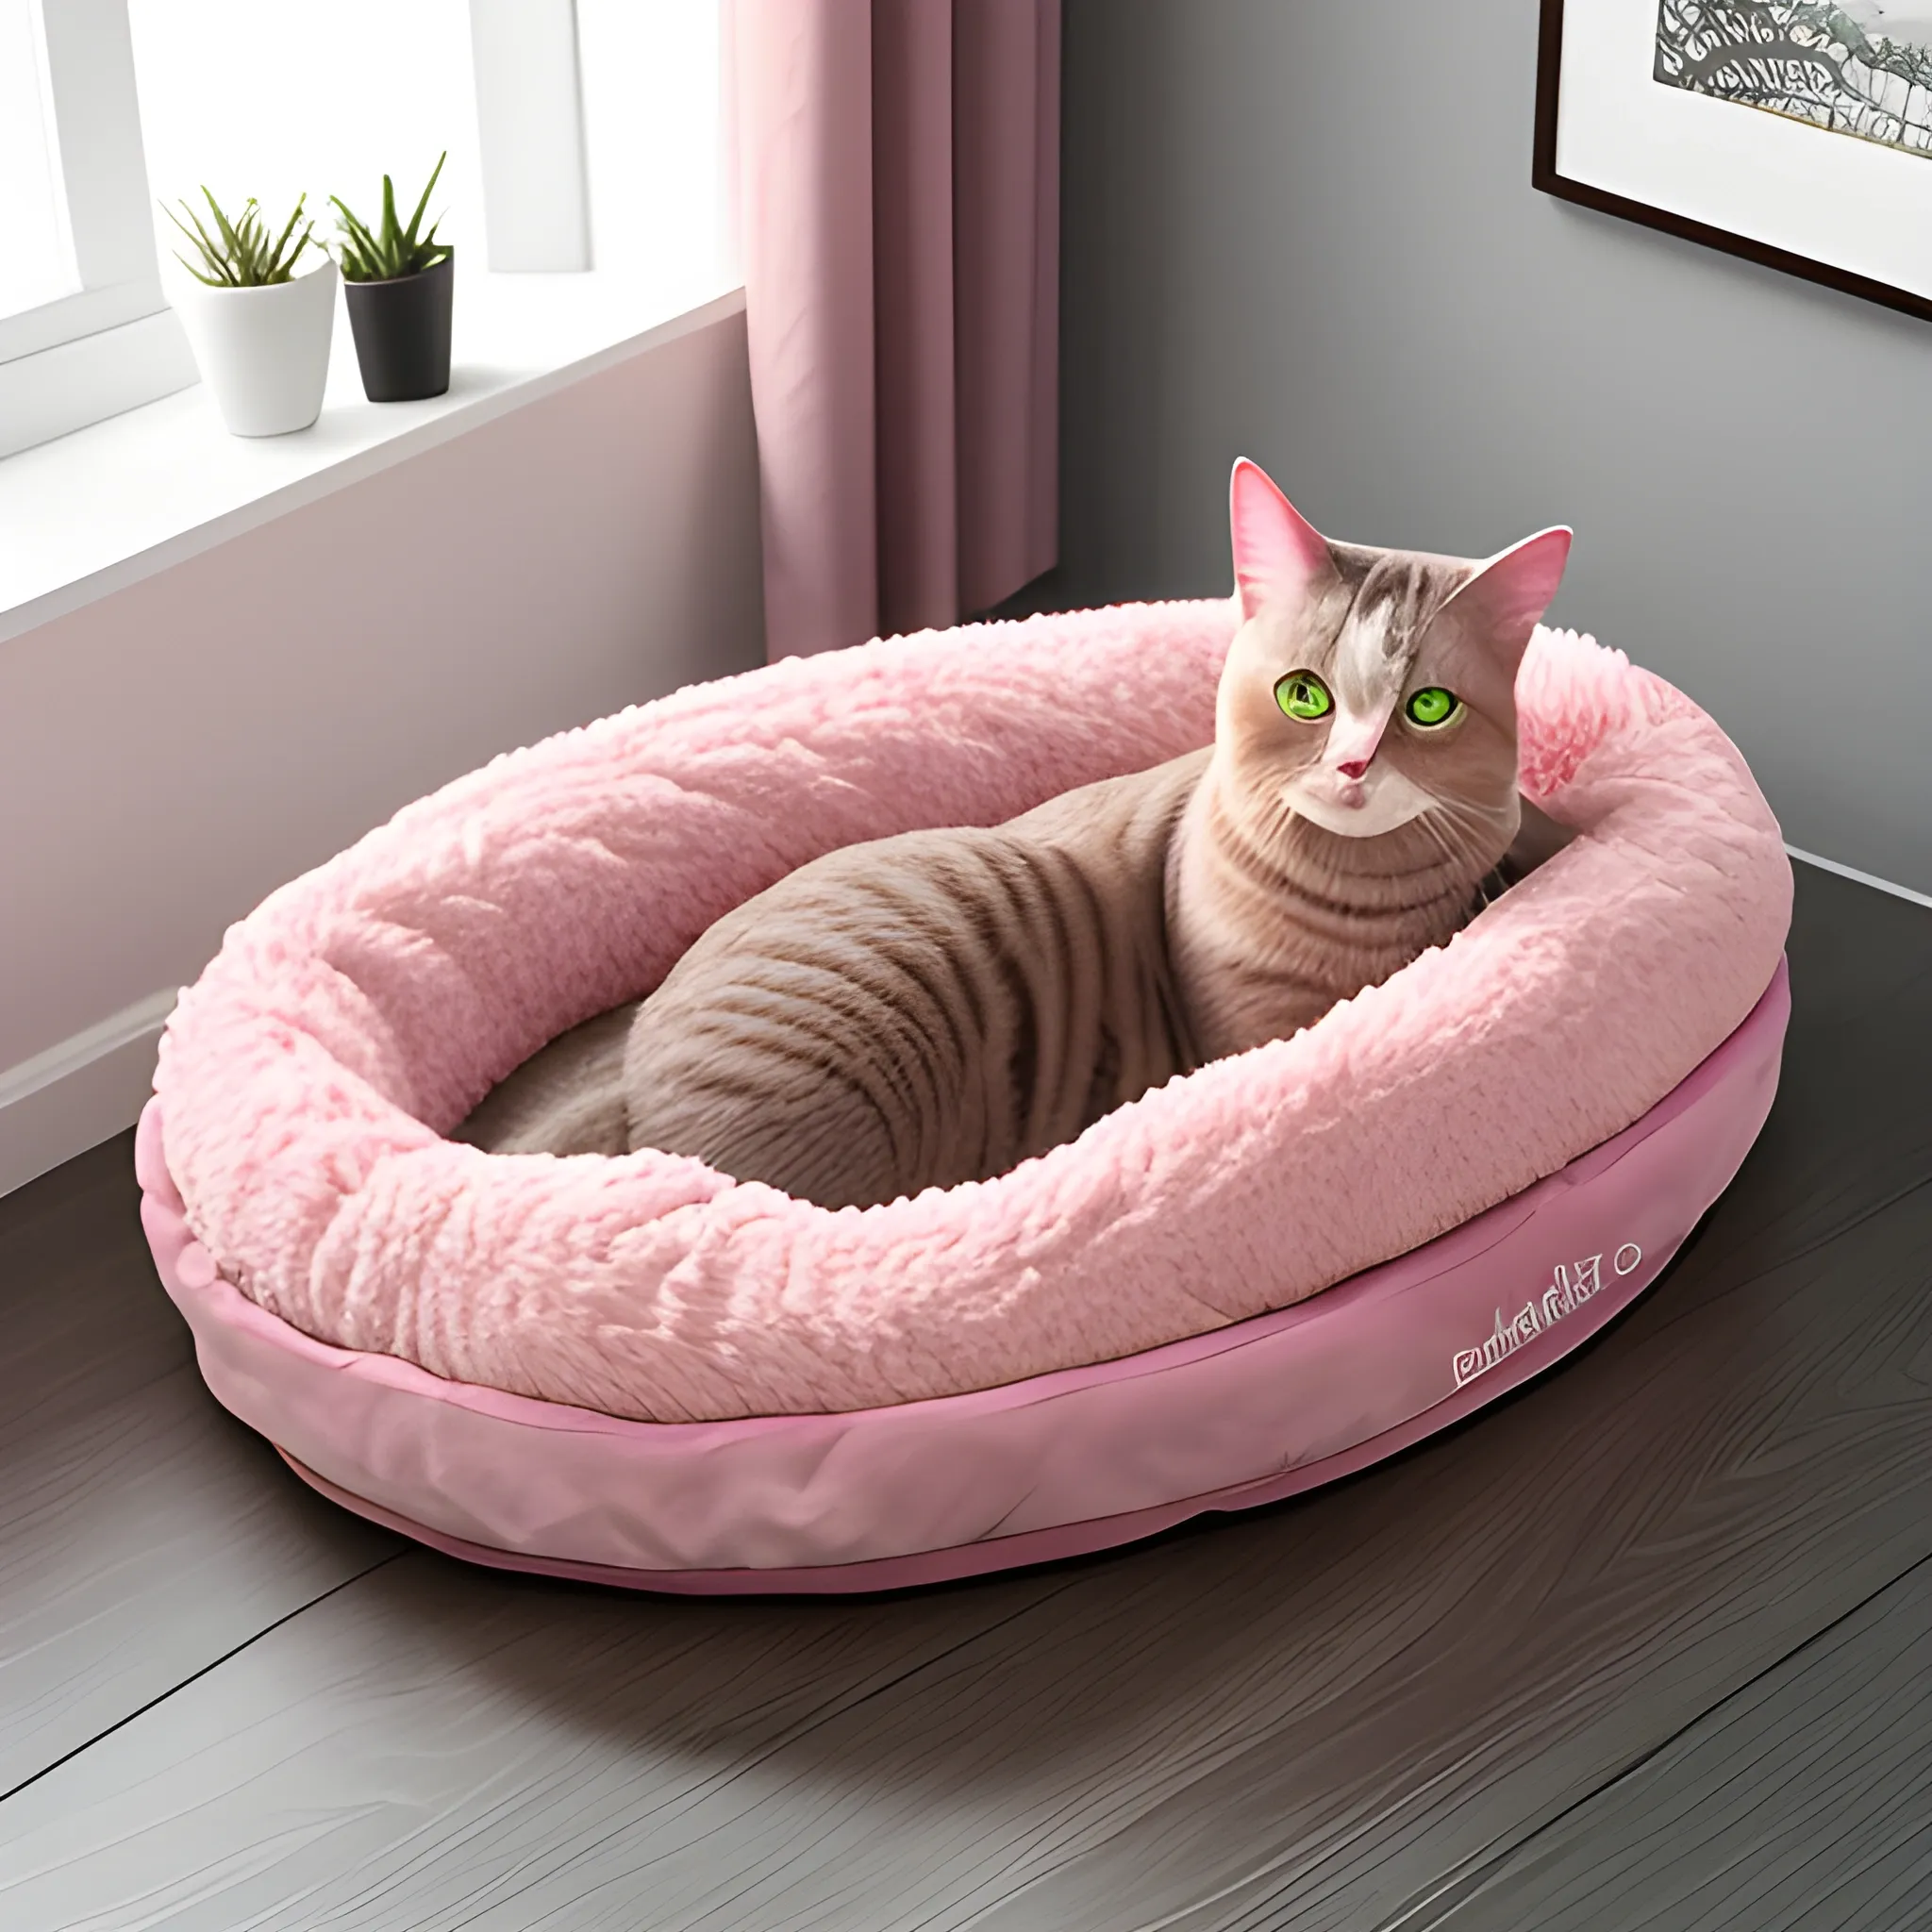 realistic young girl with pink hair, cat, bed, house 
